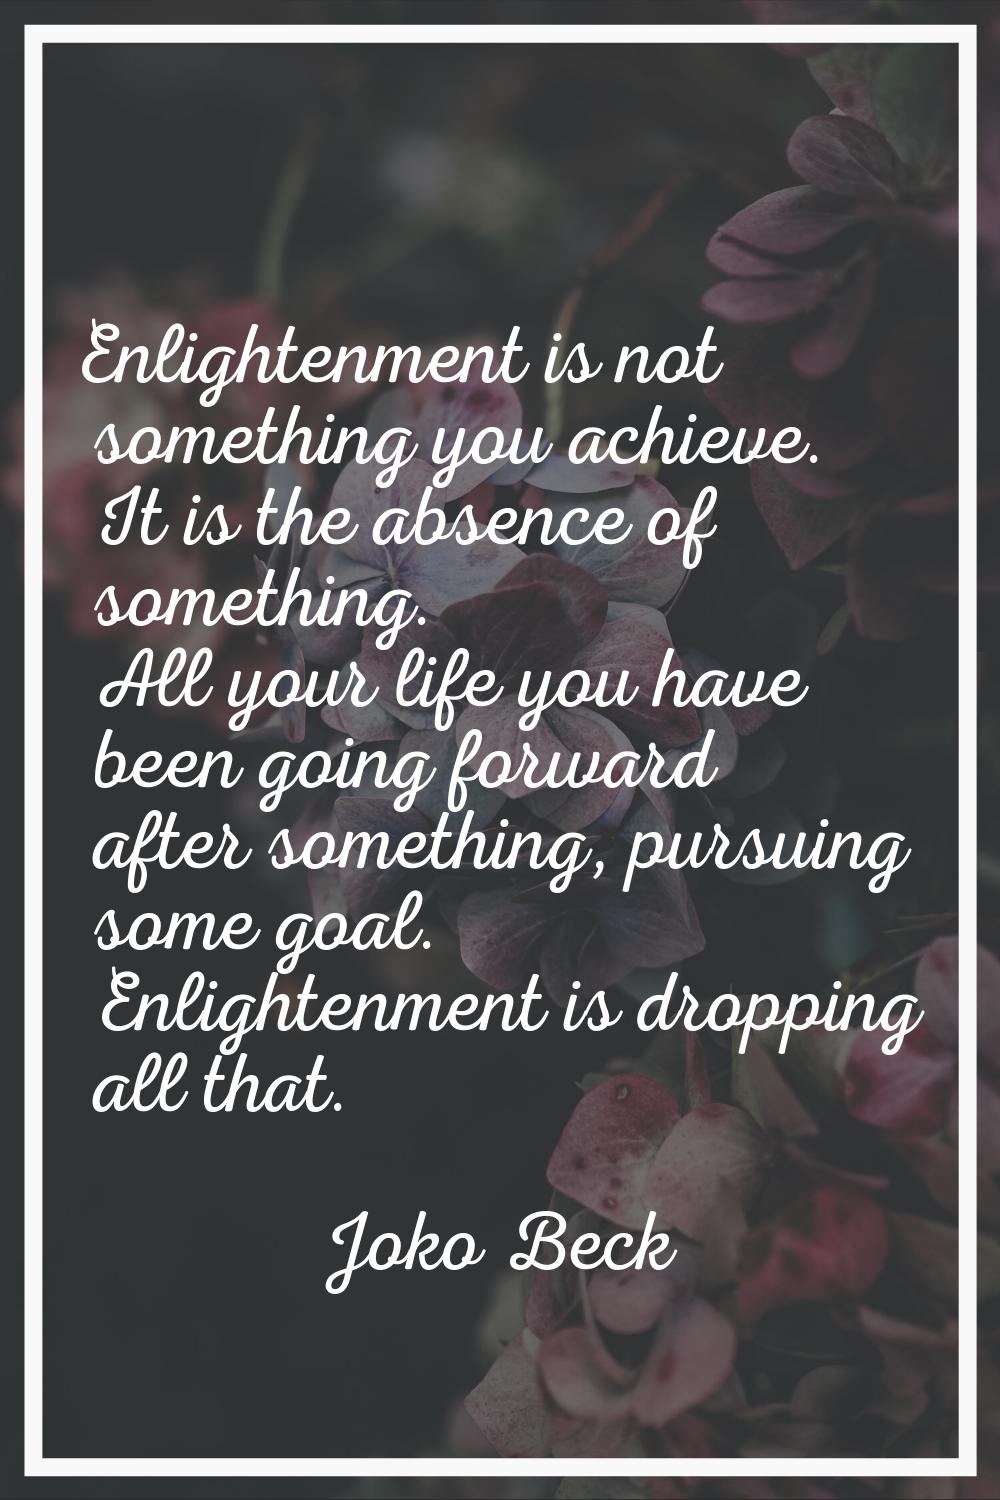 Enlightenment is not something you achieve. It is the absence of something. All your life you have 